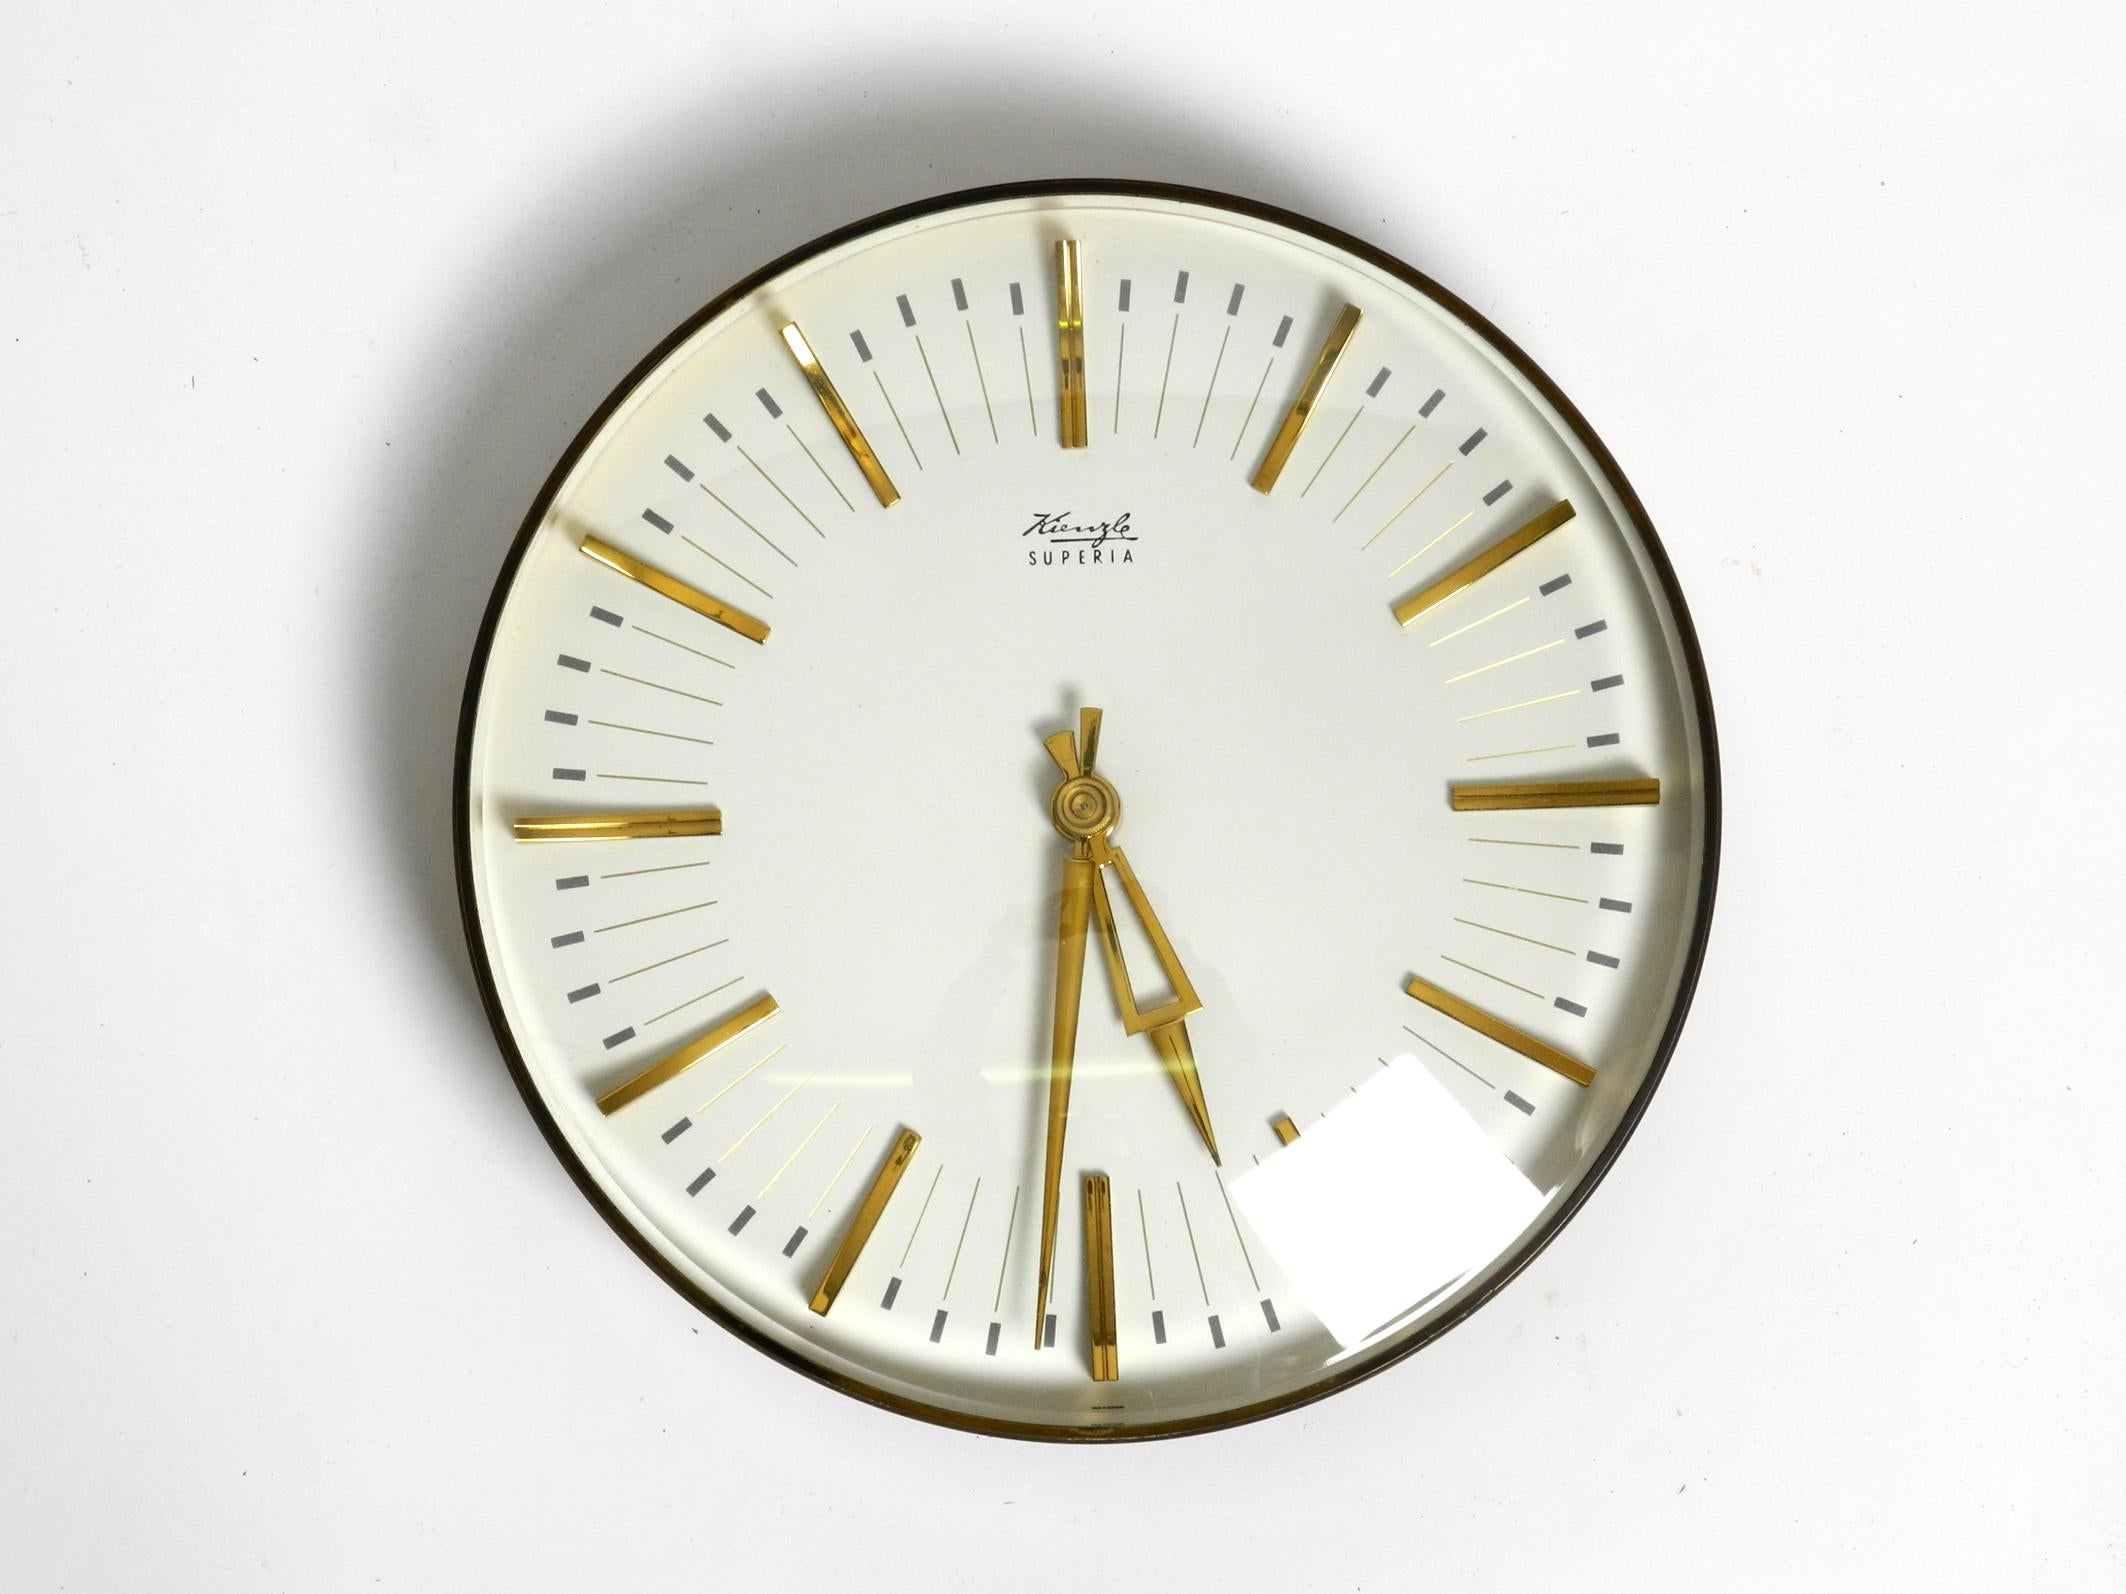 Beautiful, very elegant, heavy midcentury Kienzle Superia brass wall clock.
Made in Germany. Very nice typical Minimalist midcentury Kienzle design.
Battery operated with original electromechanical drive.
The electric motor winds a spring that